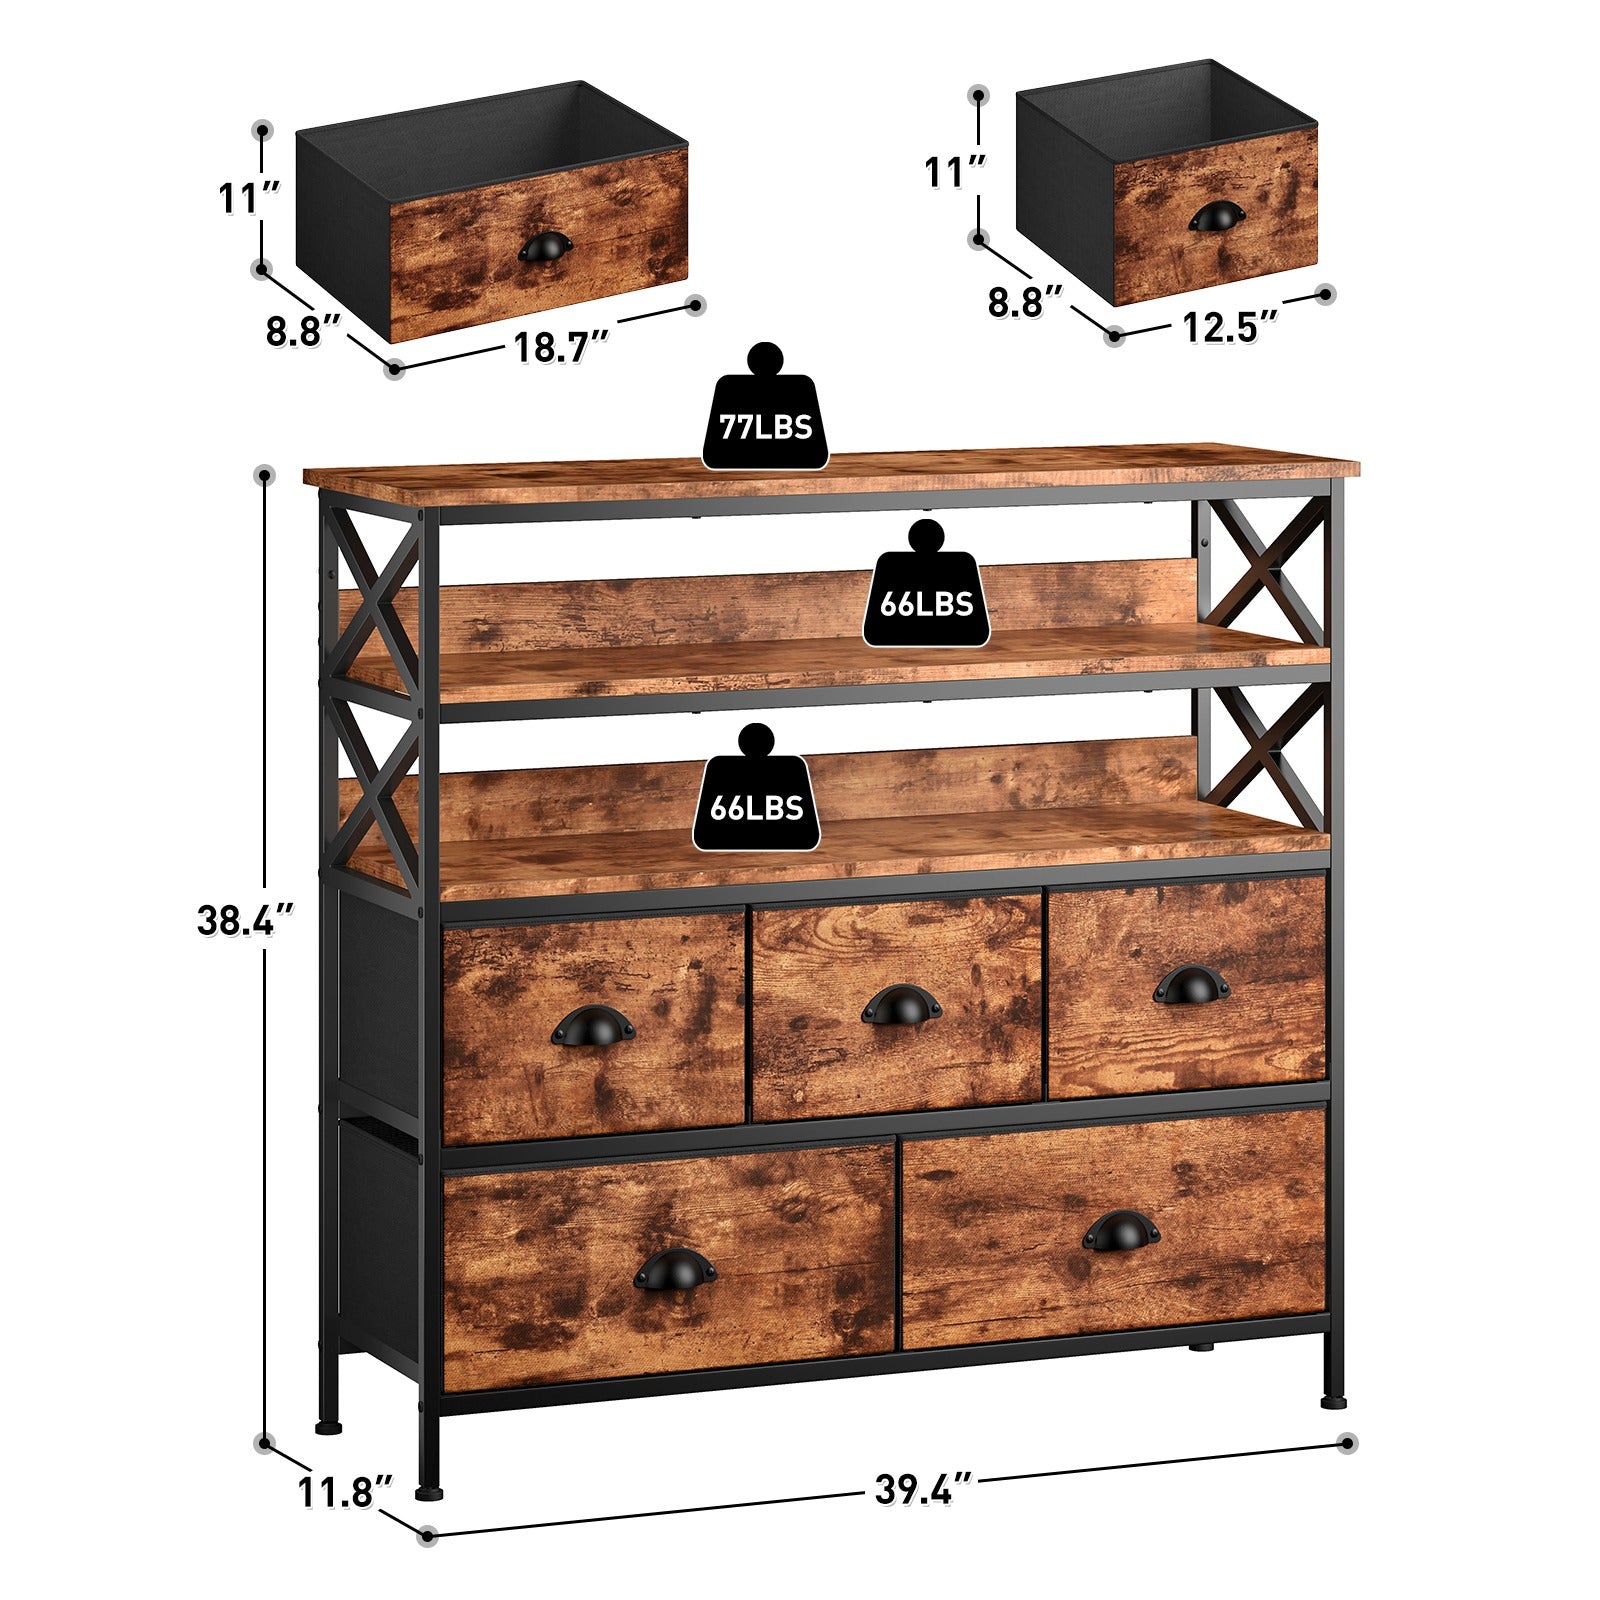 EnHomee Dresser TV Stand Dimension and Capacity